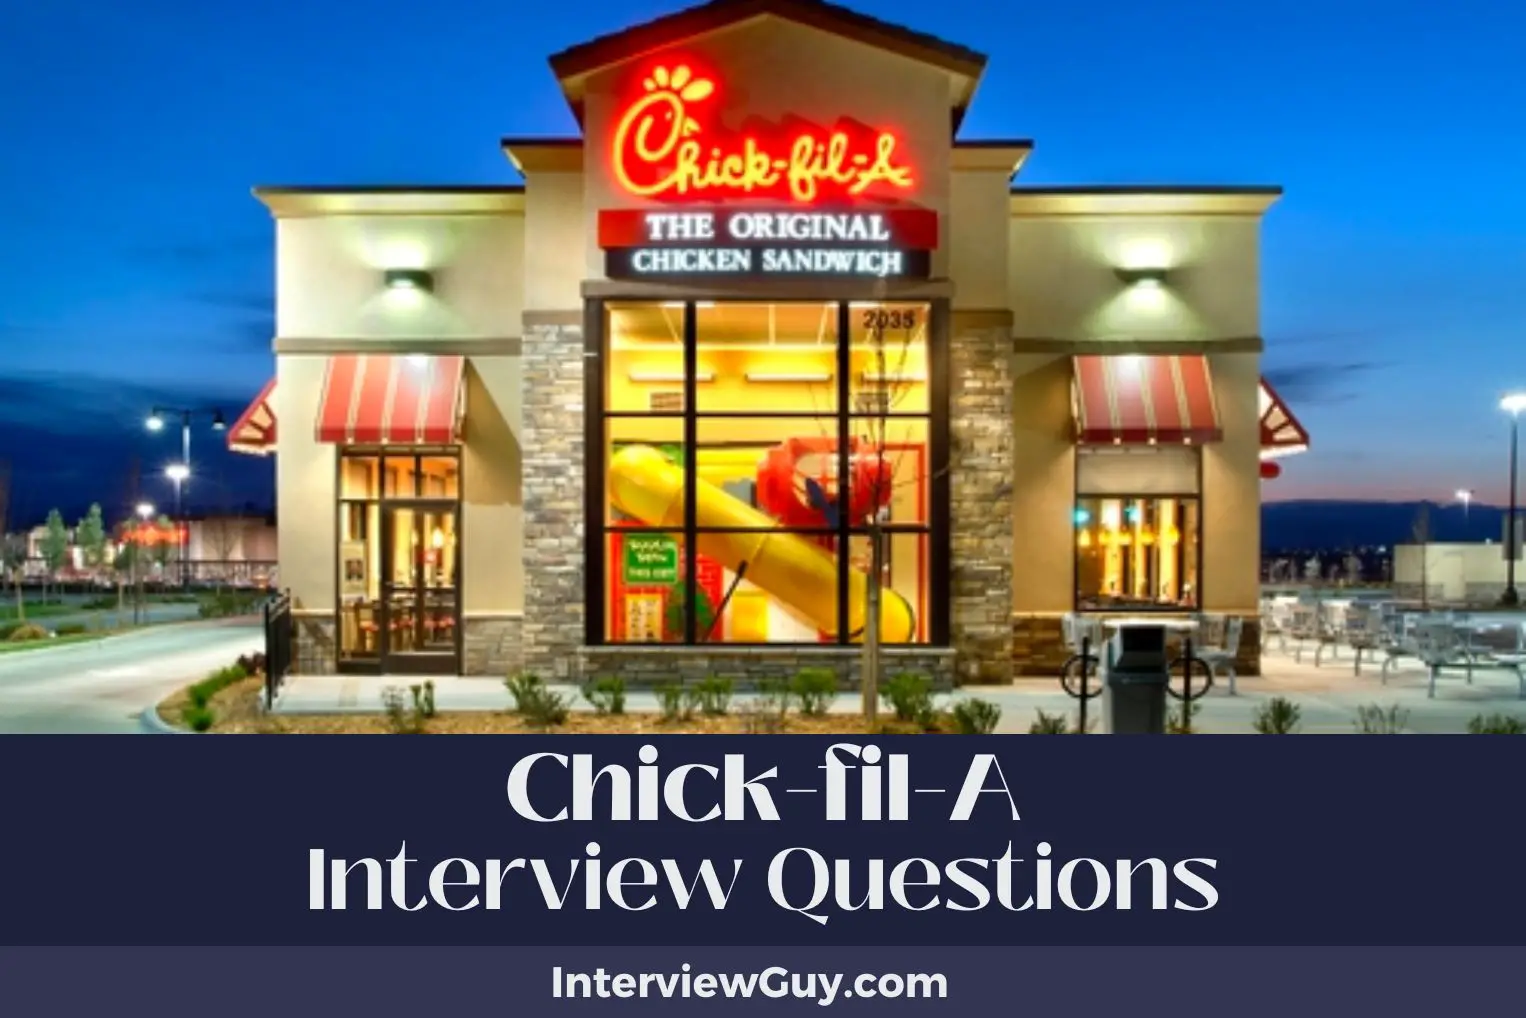 Chick-fil-A Interview Questions